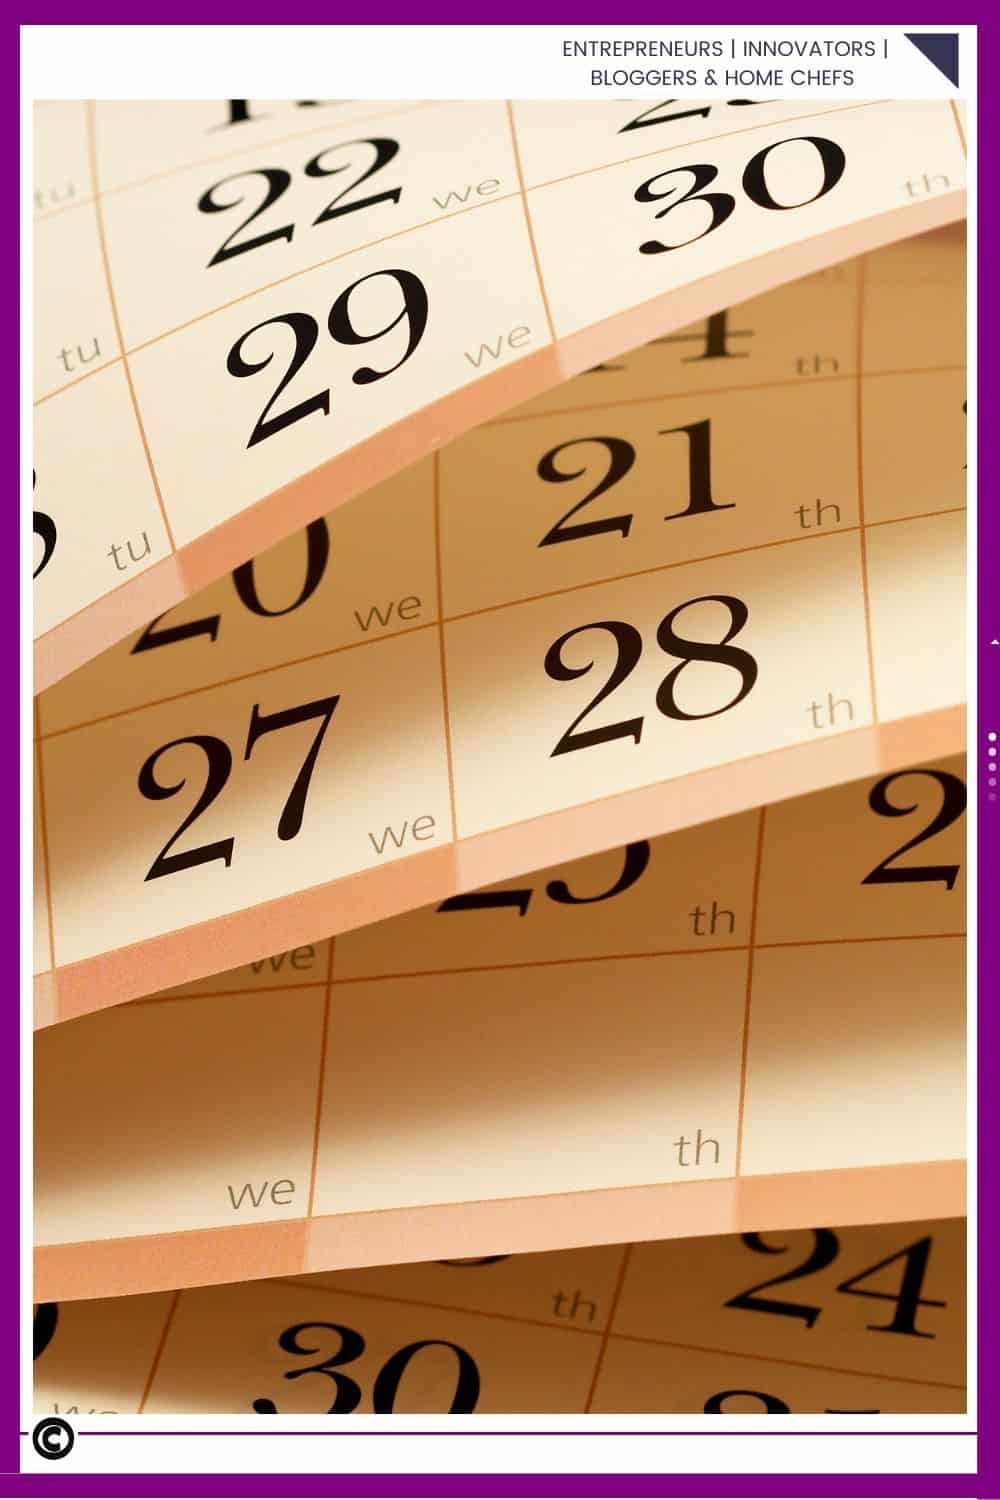 an image of 4 pages of a calendar